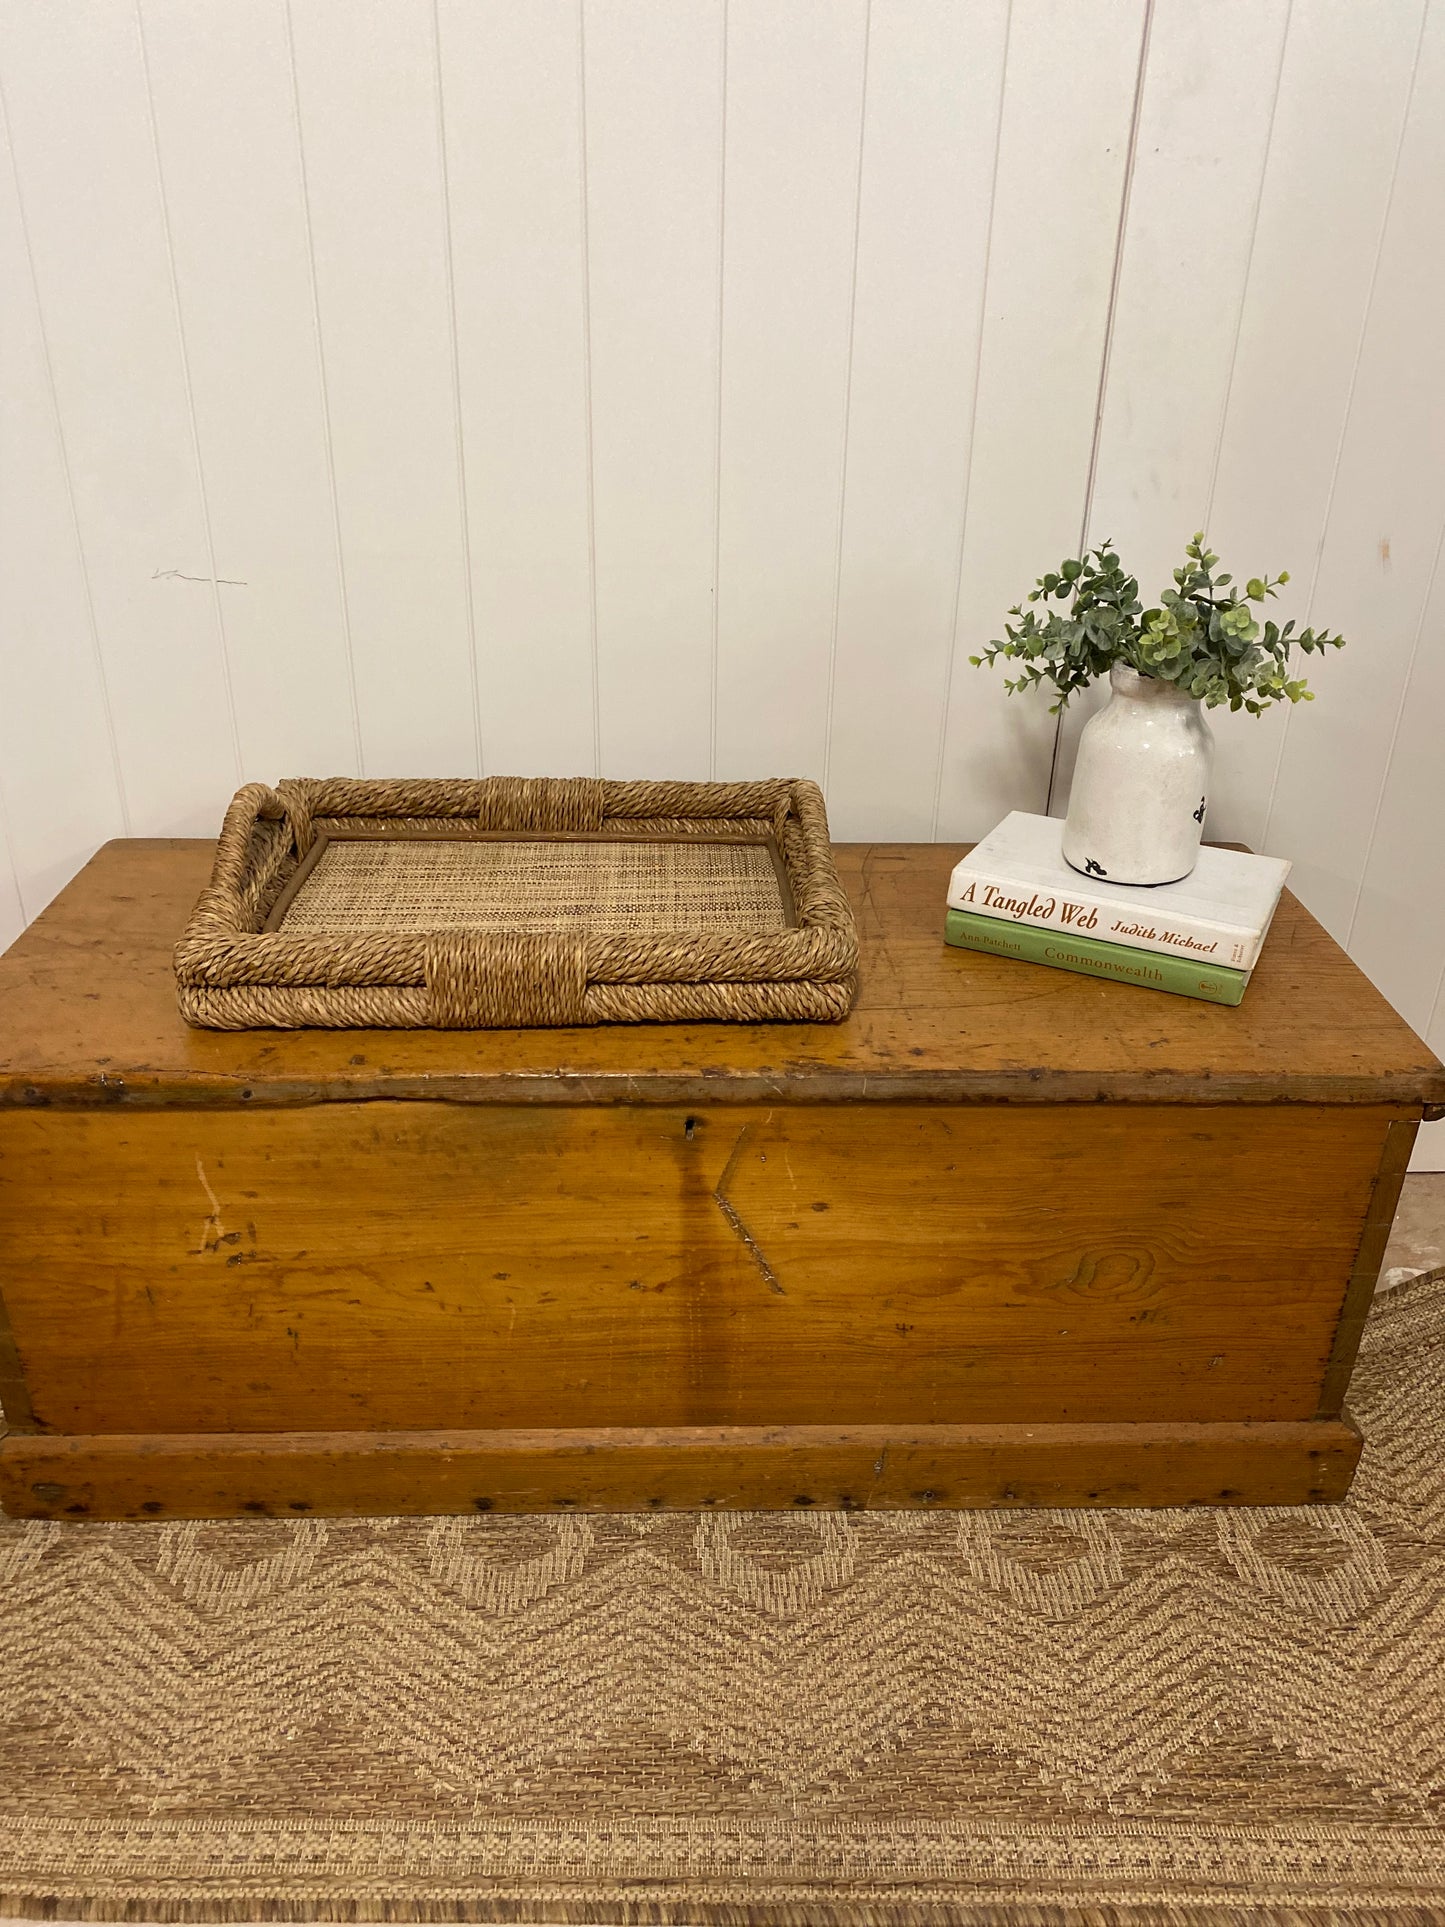 Vintage Pine Chest Coffee Table